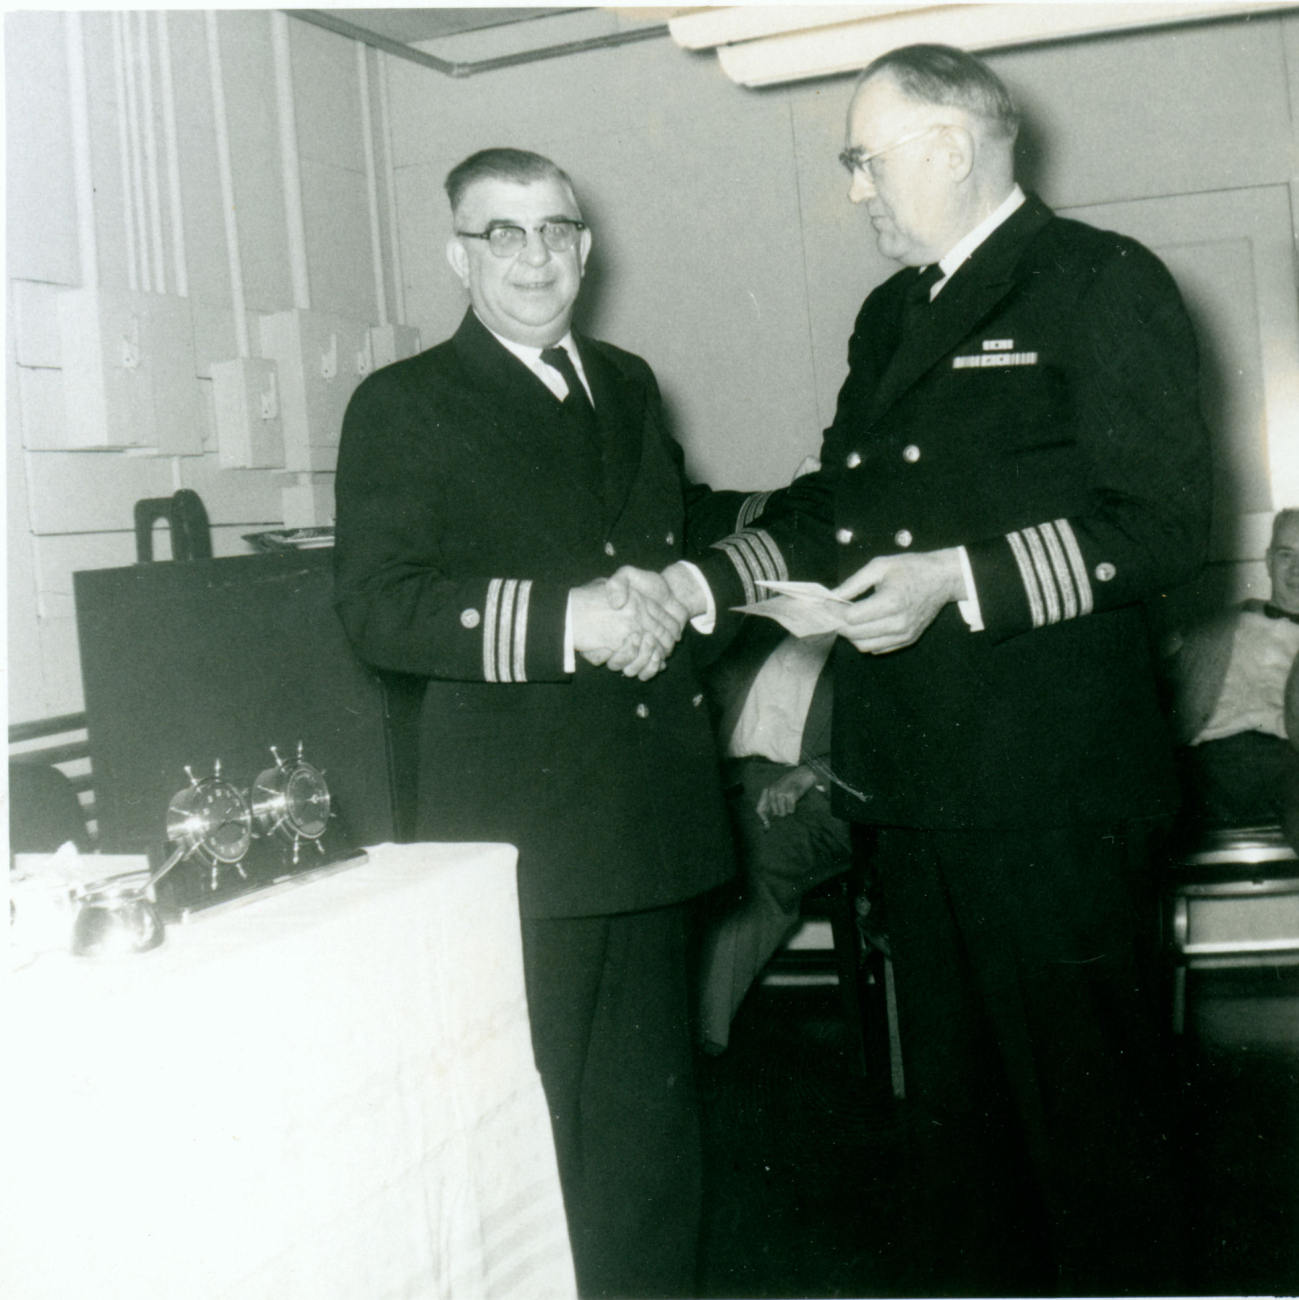 Commander Carl Mast on left congratulating Captain Albert Hoskinson on right onthe occasion of his retirement